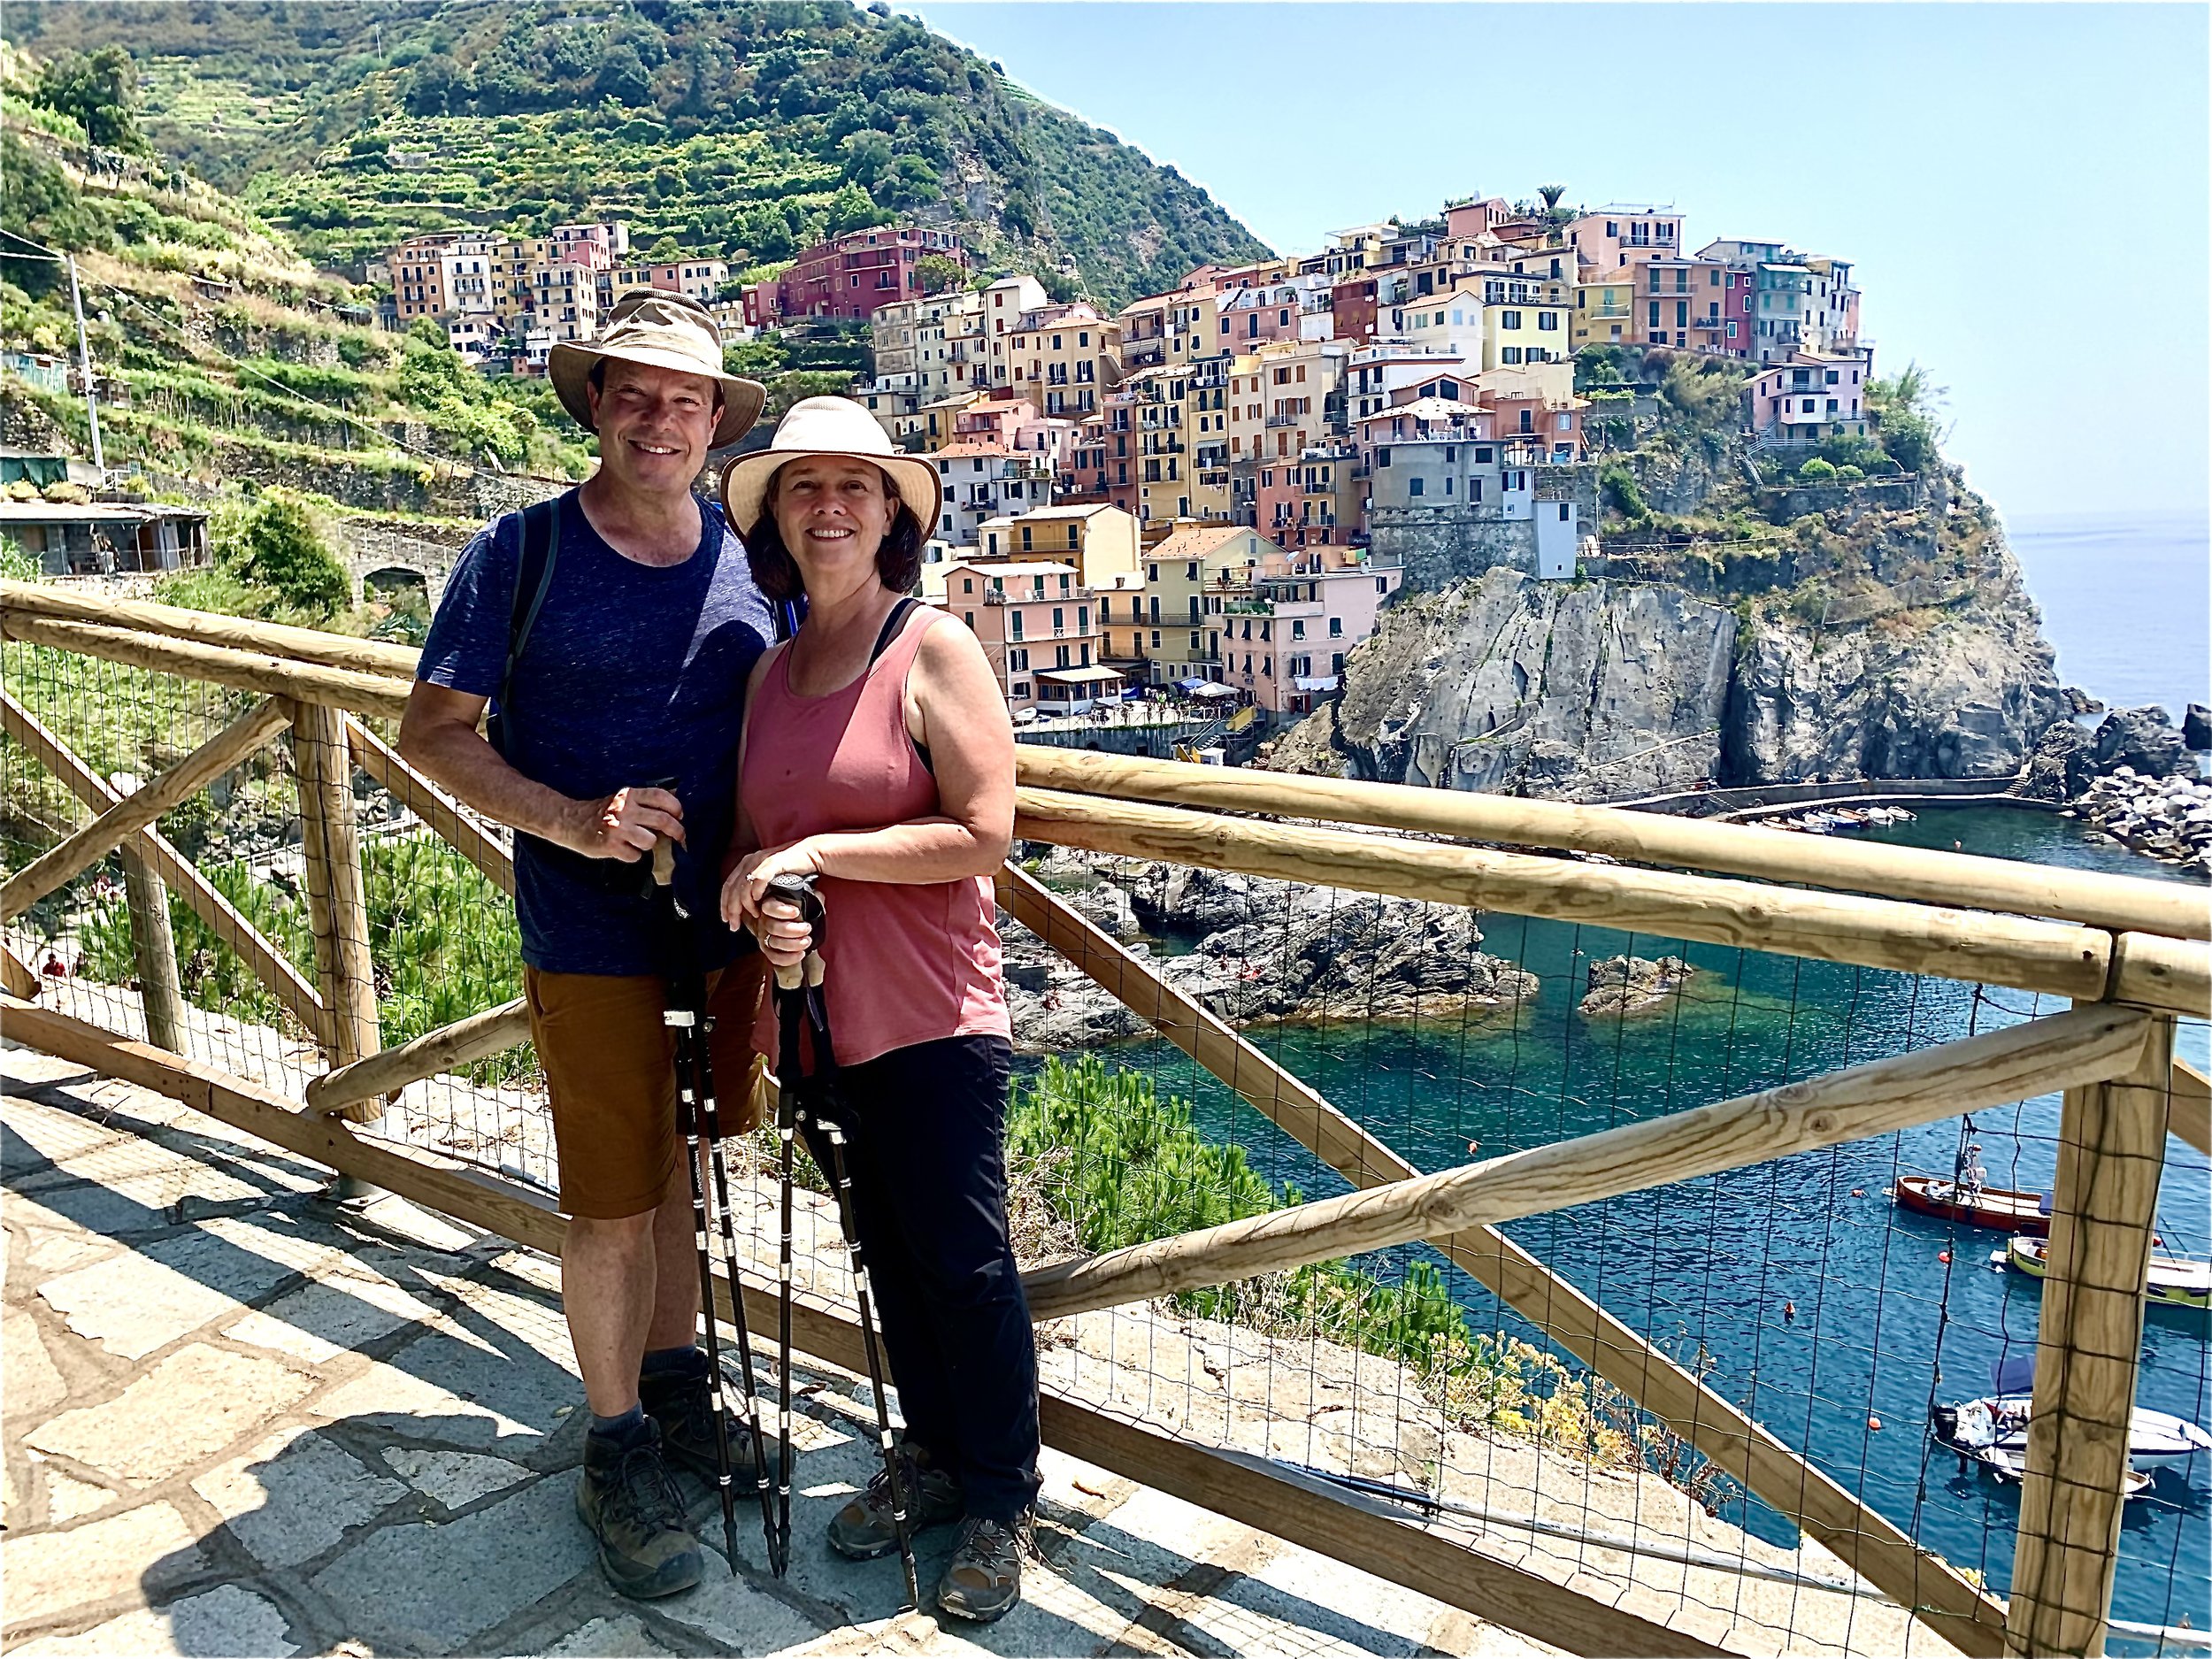 Cinque Terre: Discover Its Exquisite Beauty & History